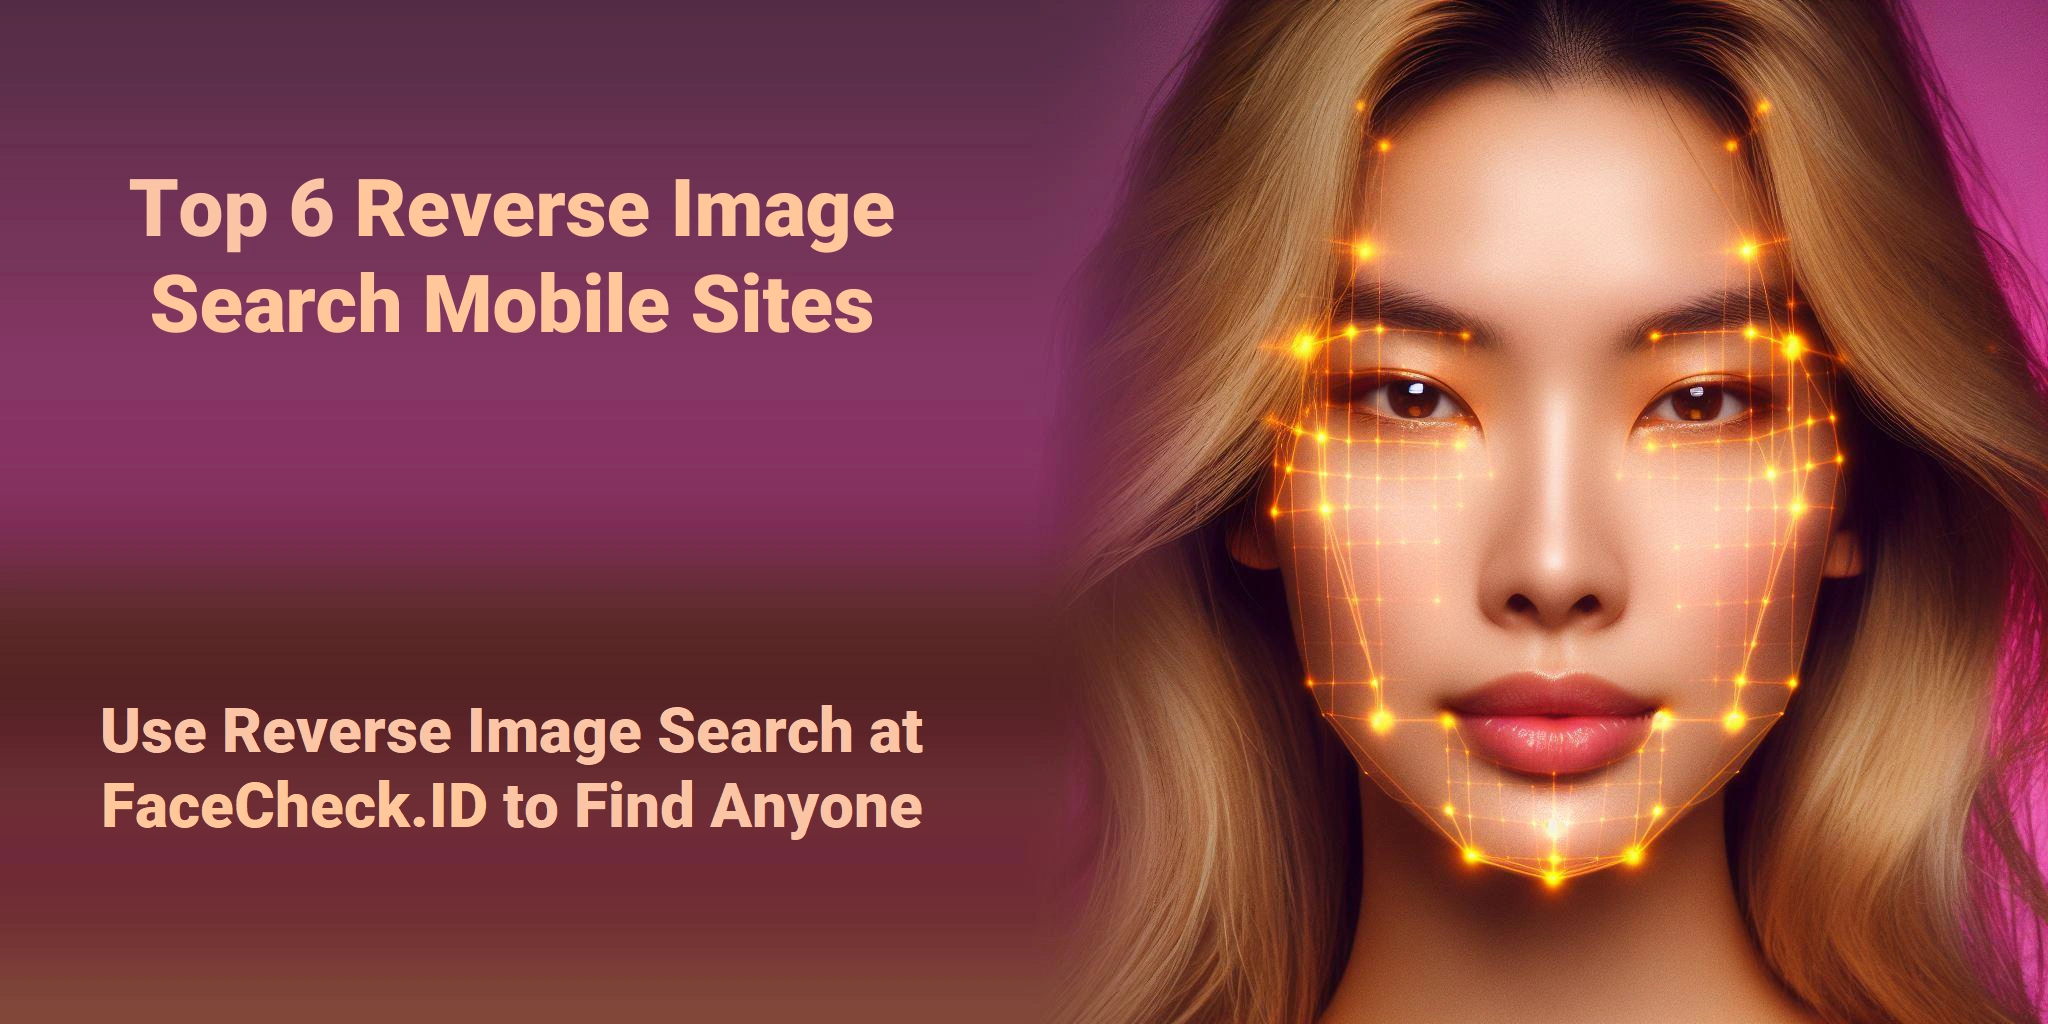 Top 6 Reverse Image Search Mobile Sites Use Reverse Image Search at FaceCheck.ID to Find Anyone